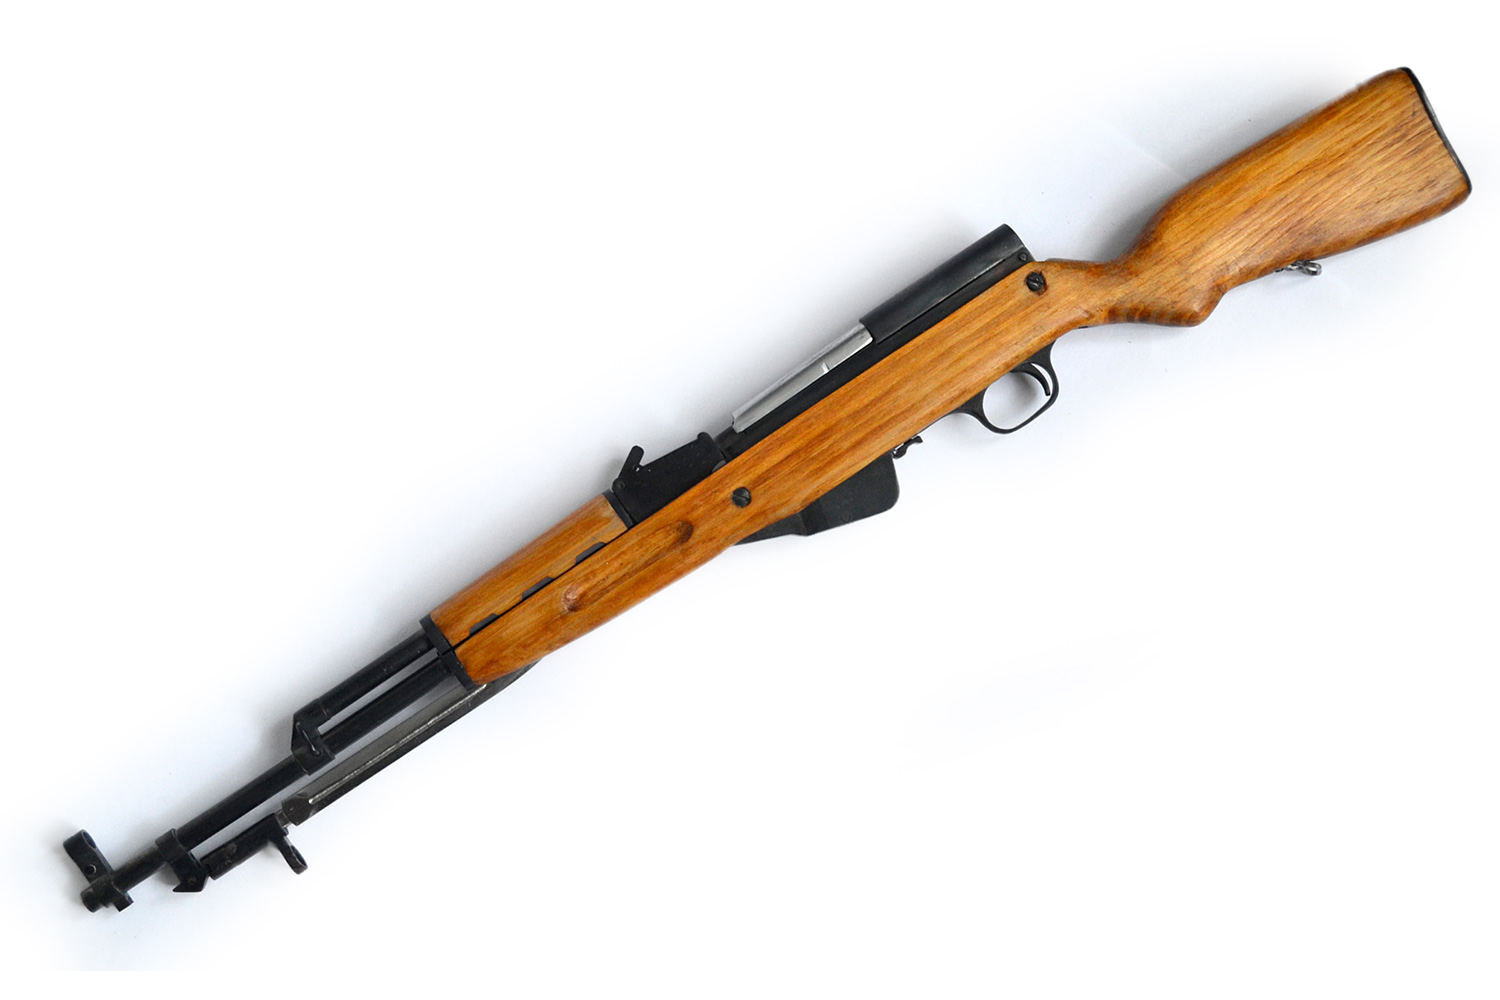 SKS rifle scale 1:3 ����������� 5